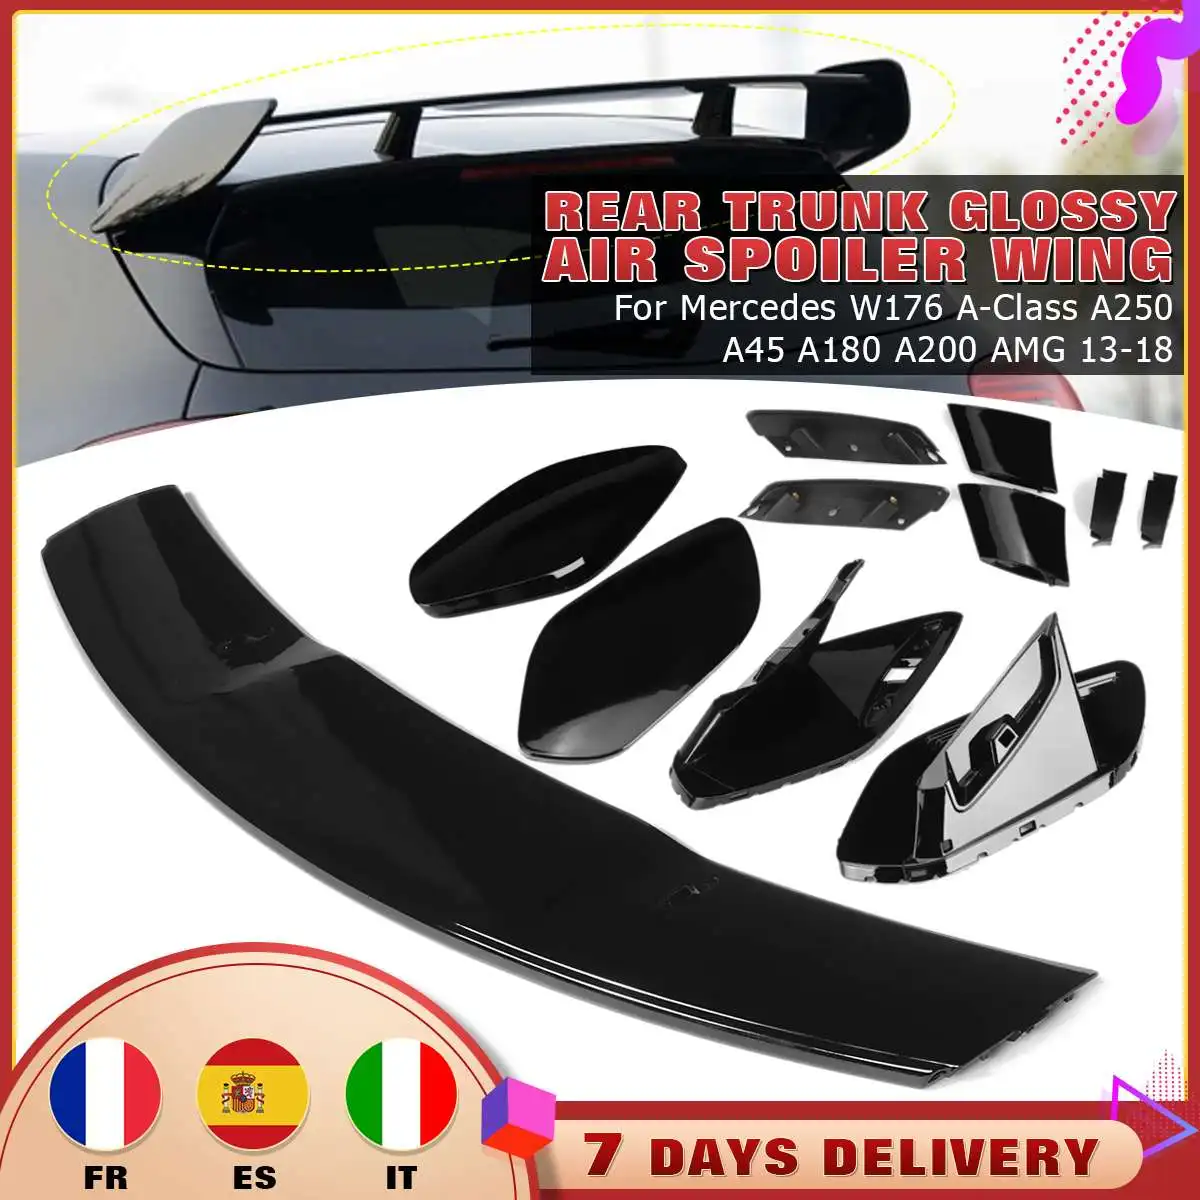 

For Mercedes Benz A Class W176 W177 A160 A180 A200 A250 A45 AMG 5-Door Hatchback 2013+ ABS Plastic Rear Spoiler Wing Trunk Cover